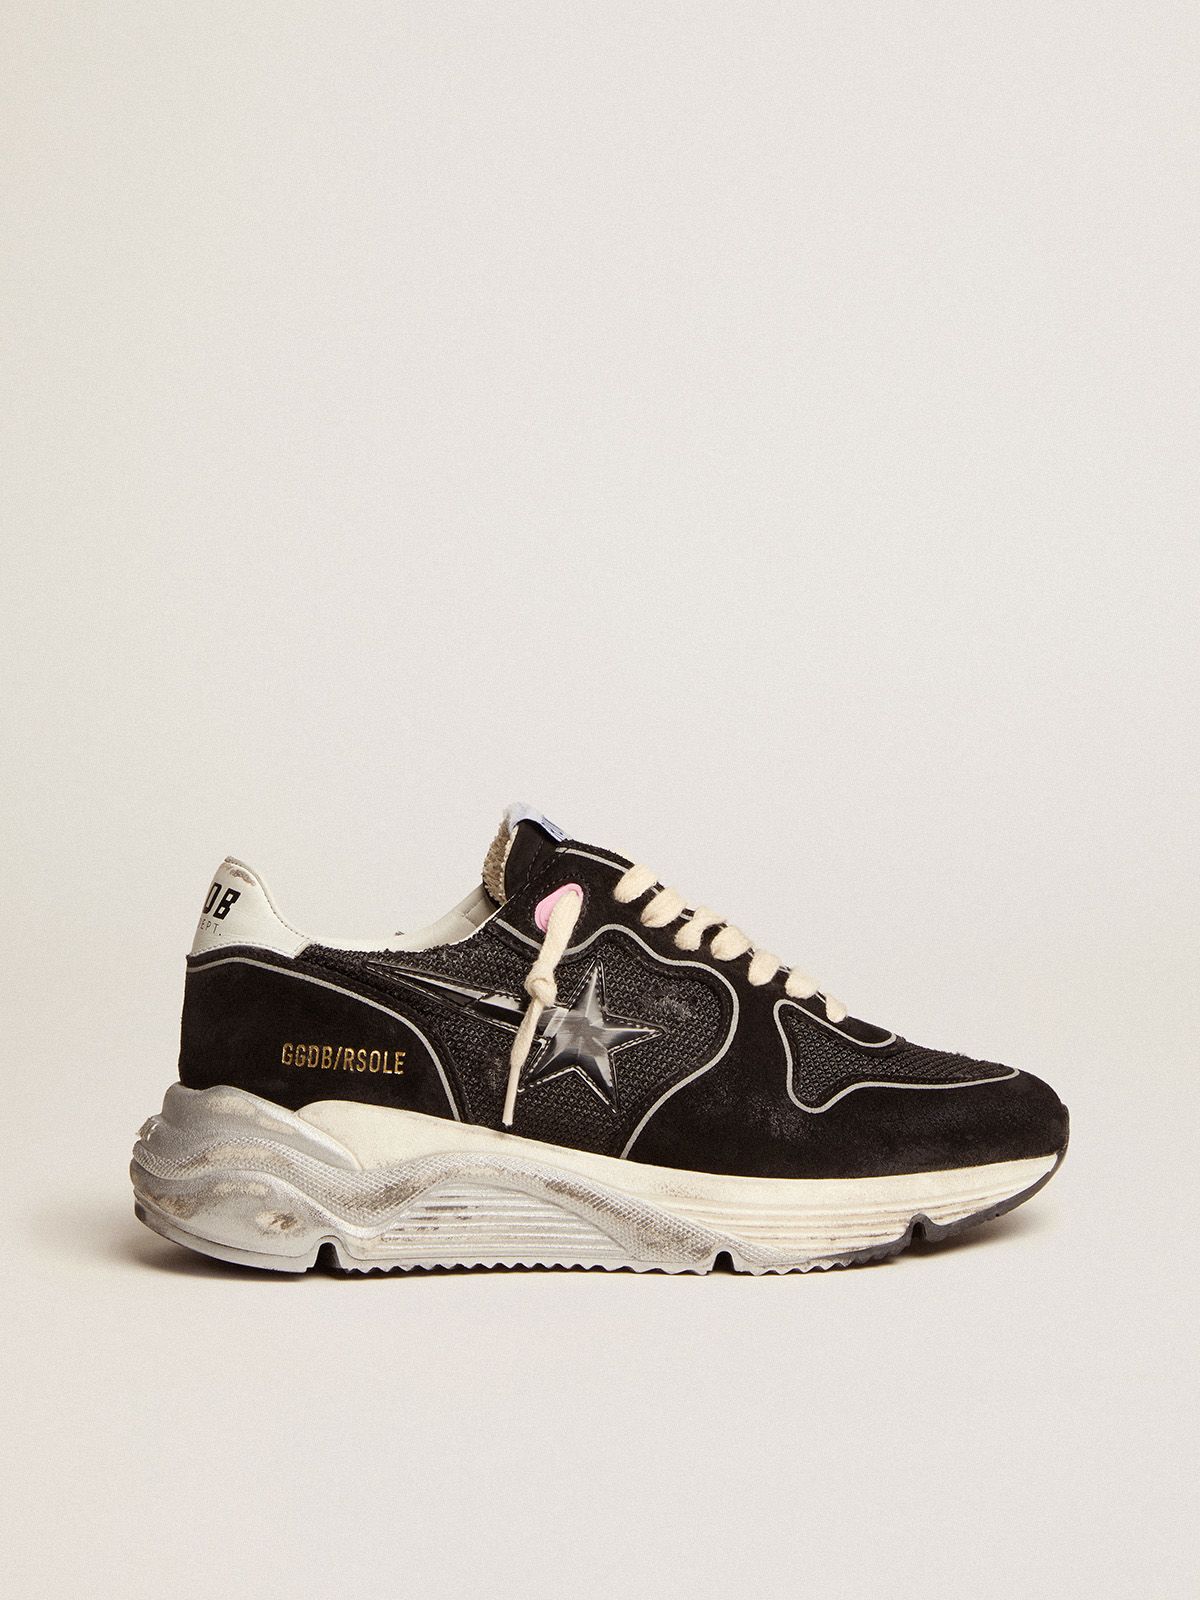 golden goose sneakers suede Running star 3D Sole with black and upper mesh